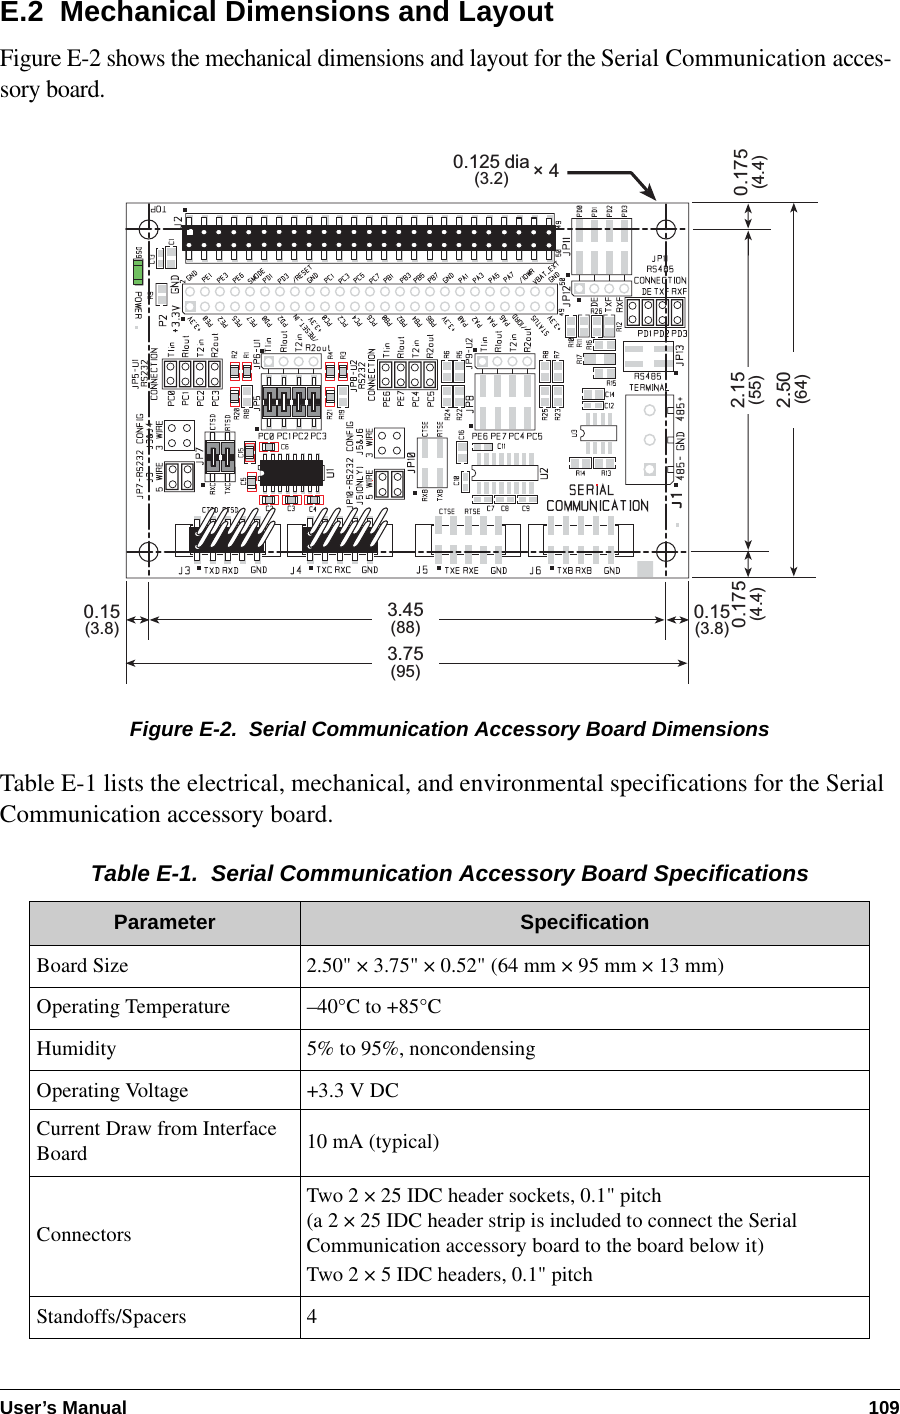 User’s Manual 109E.2  Mechanical Dimensions and LayoutFigure E-2 shows the mechanical dimensions and layout for the Serial Communication acces-sory board.Figure E-2.  Serial Communication Accessory Board DimensionsTable E-1 lists the electrical, mechanical, and environmental specifications for the Serial Communication accessory board.Table E-1.  Serial Communication Accessory Board SpecificationsParameter SpecificationBoard Size 2.50&quot; × 3.75&quot; × 0.52&quot; (64 mm × 95 mm × 13 mm)Operating Temperature –40°C to +85°CHumidity 5% to 95%, noncondensingOperating Voltage +3.3 V DCCurrent Draw from Interface Board 10 mA (typical)ConnectorsTwo 2 × 25 IDC header sockets, 0.1&quot; pitch(a 2 × 25 IDC header strip is included to connect the Serial Communication accessory board to the board below it)Two 2 × 5 IDC headers, 0.1&quot; pitchStandoffs/Spacers 40.15(3.8)0.15(3.8)0.175(4.4)3.45(88)3.75(95)2.50(64)0.175(4.4)× 40.125 dia(3.2)2.15(55)